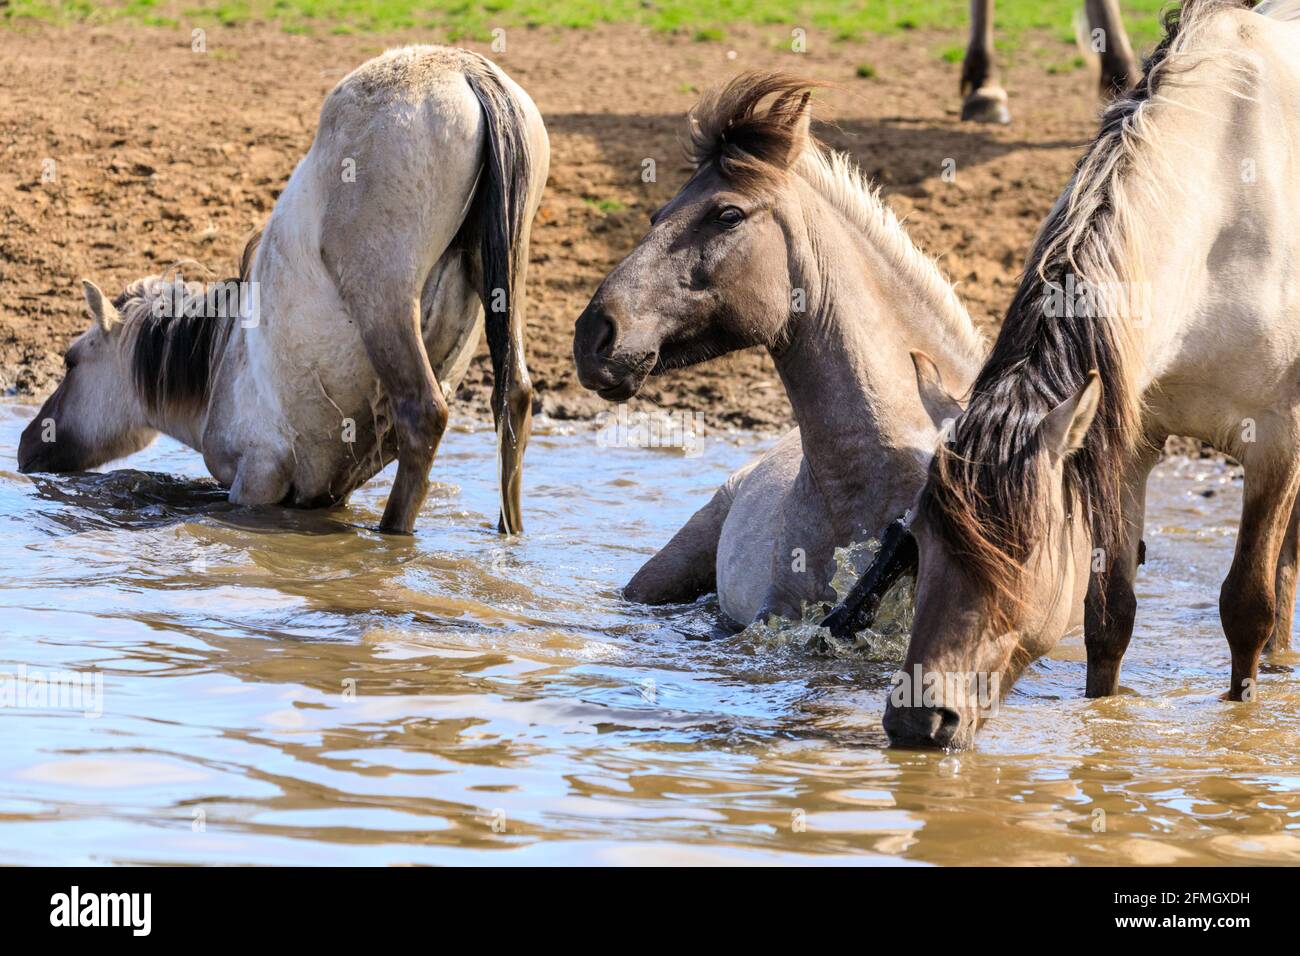 Dülmen, NRW, Germany. 09th May, 2021. Two horses take a dip in the water. The herd of Dülmen wild ponies (also called the Dülmener) cool down on the hottest day of the year so far, with temperatures reaching 29 degrees in the area. The breed is classified as gravely endangered. A herd of over 300 lives in semi feral conditions in an area of about 3.5 km2 in the 'Merfelder Bruch' ocuntryside, near the small town of Dülmen. They are mostly left to find their own food and shelter, promoting strength of the breed. Credit: Imageplotter/Alamy Live News Stock Photo